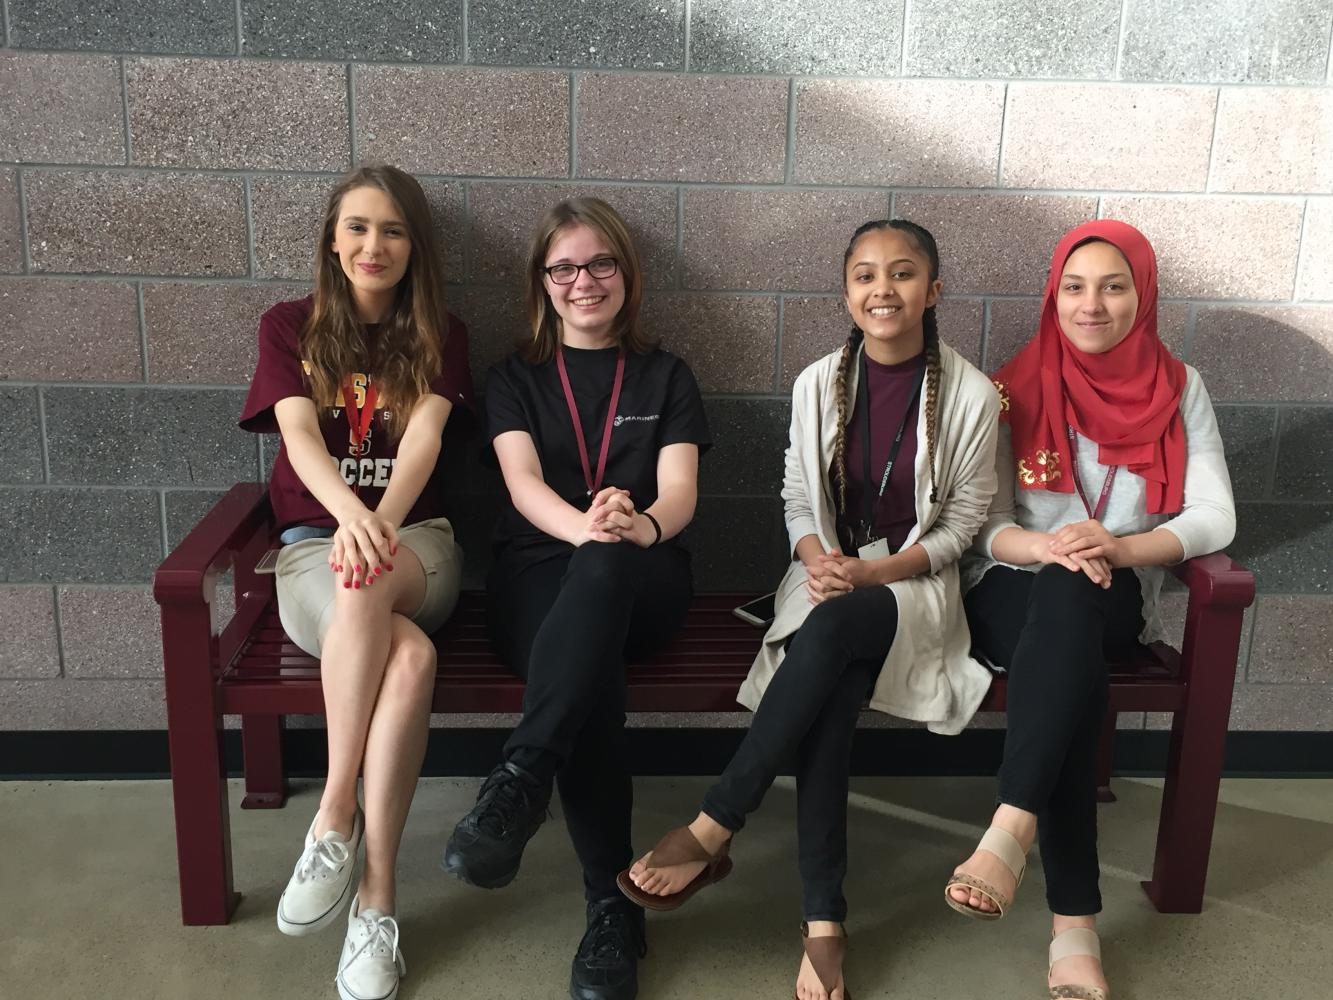 From left to right: Tiffany Growhowski, Jasmine Ippich, Daniella Wali, and Ellaa Abouelmagd. Missing is Jaynaba Kane and Kassandra Krase.